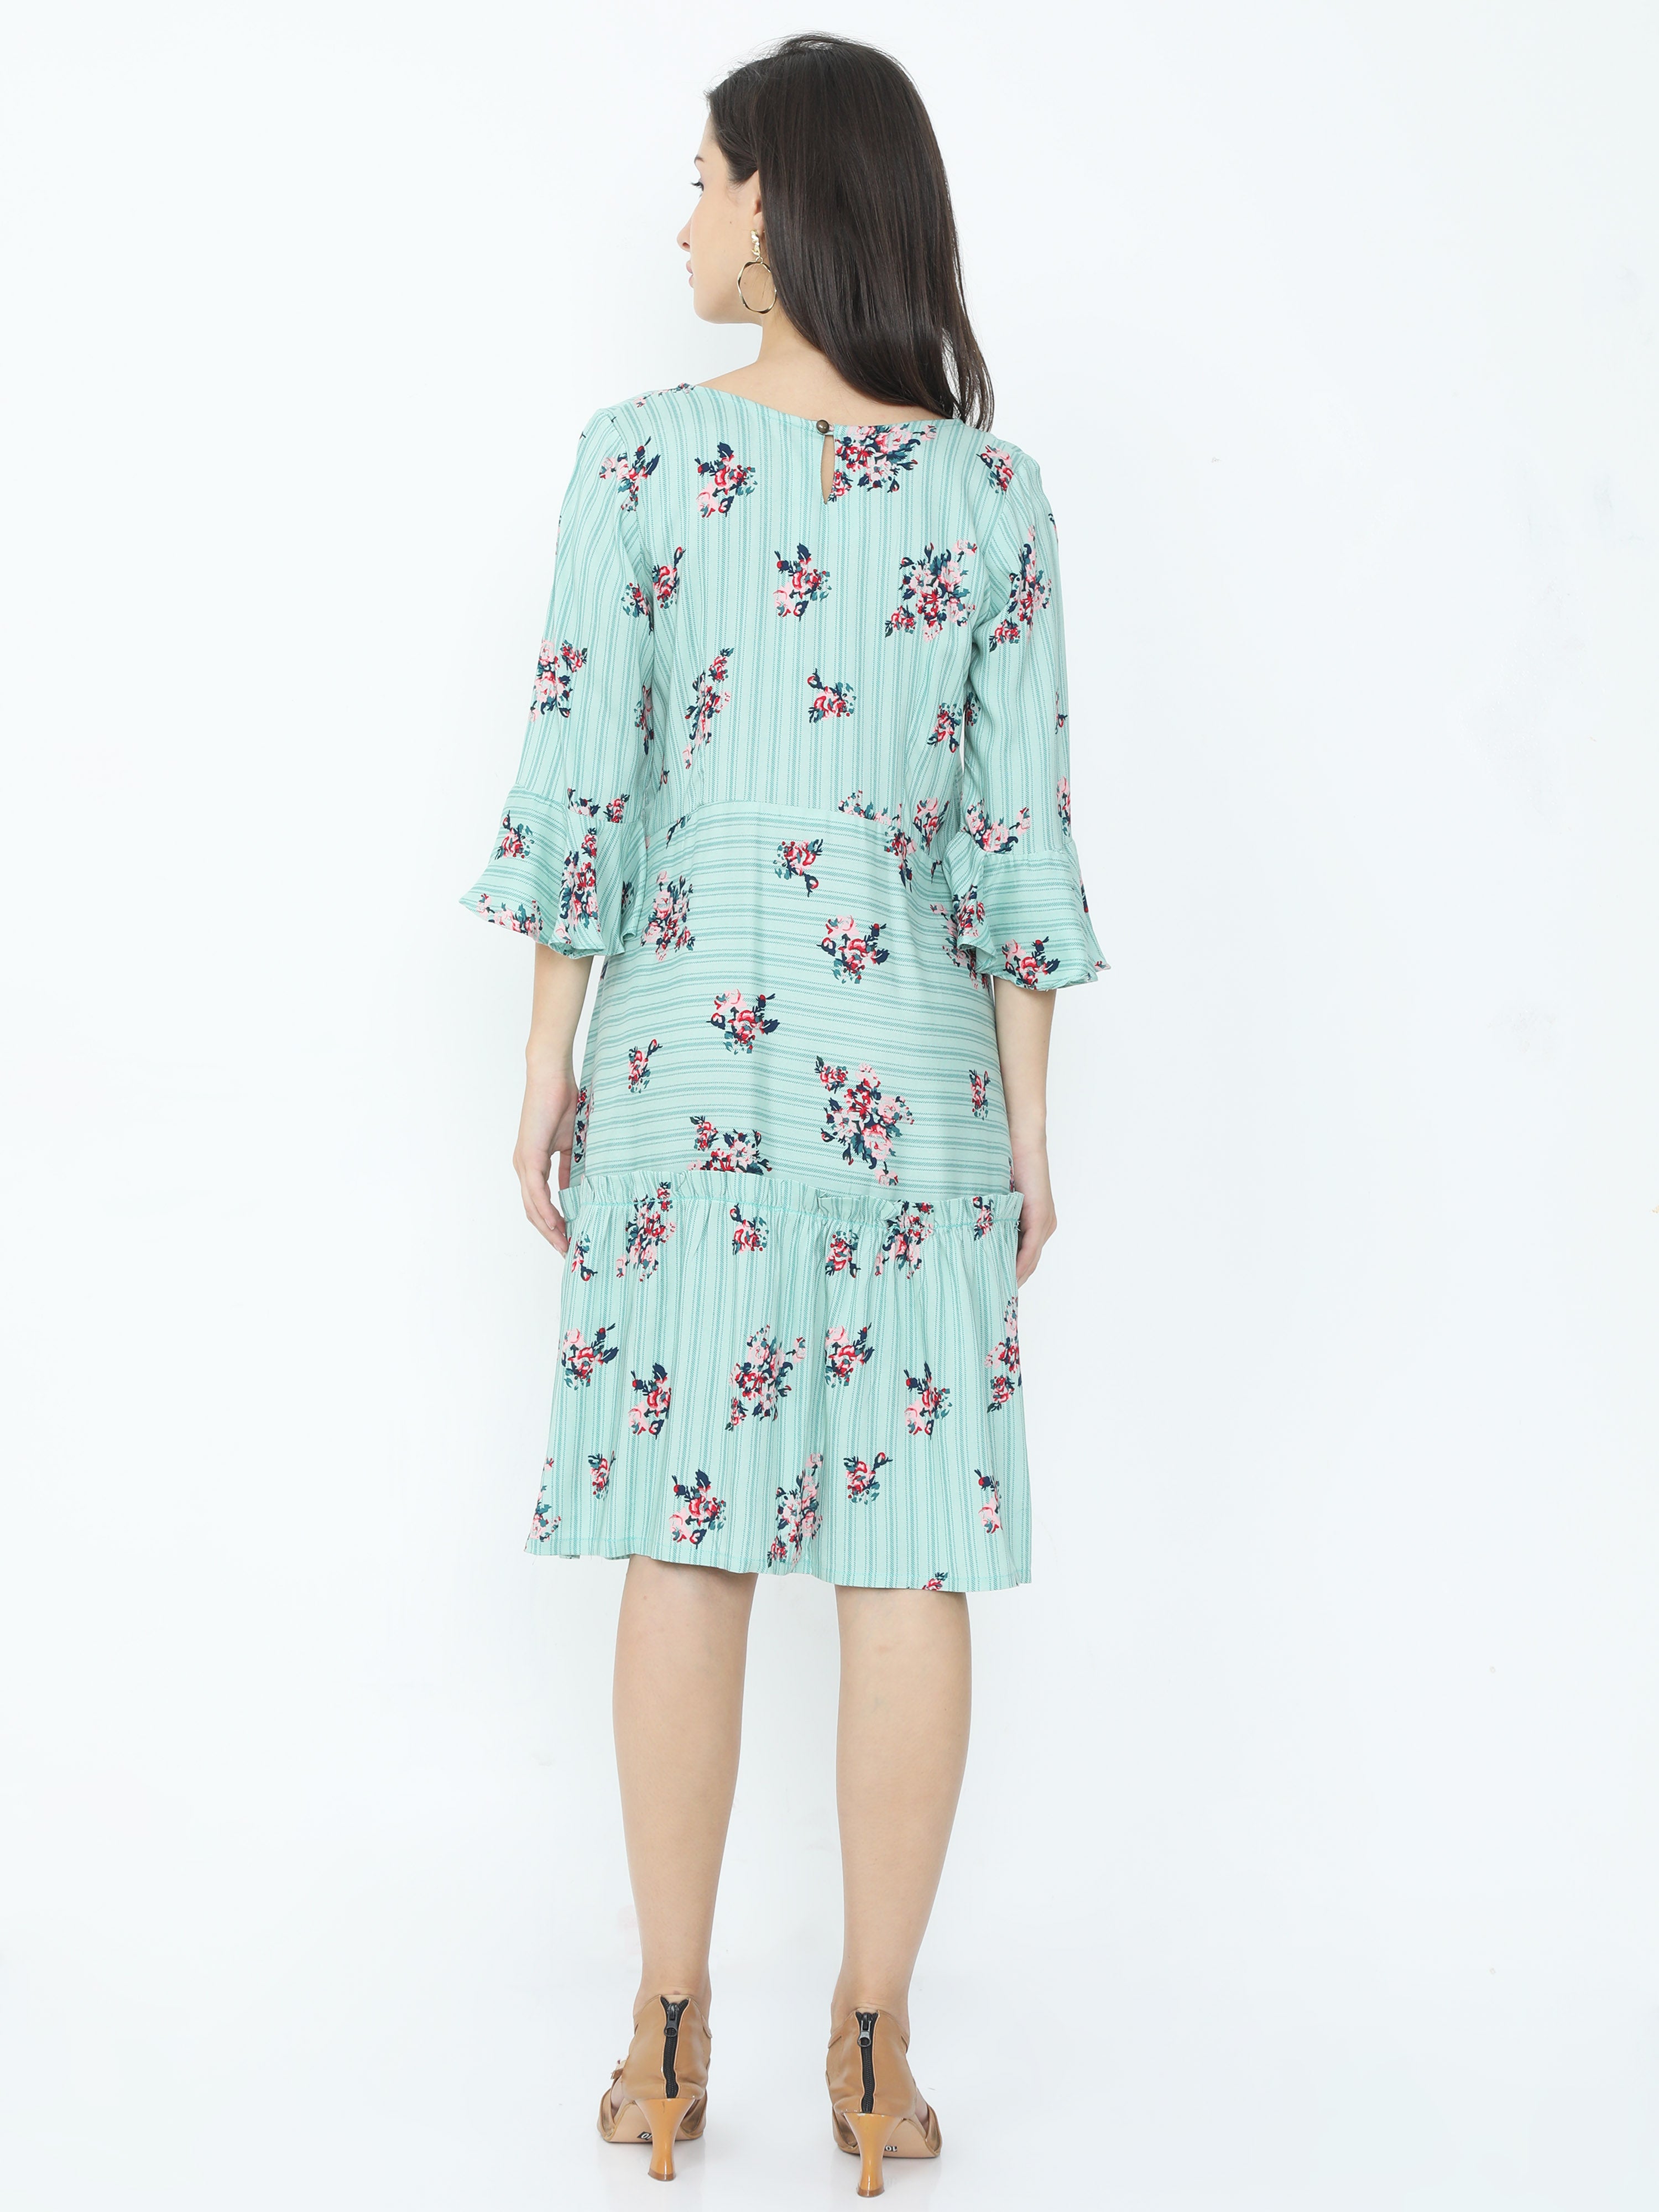 Boat Neck with Lapel Button Bell Sleeves Floral Striped Dress